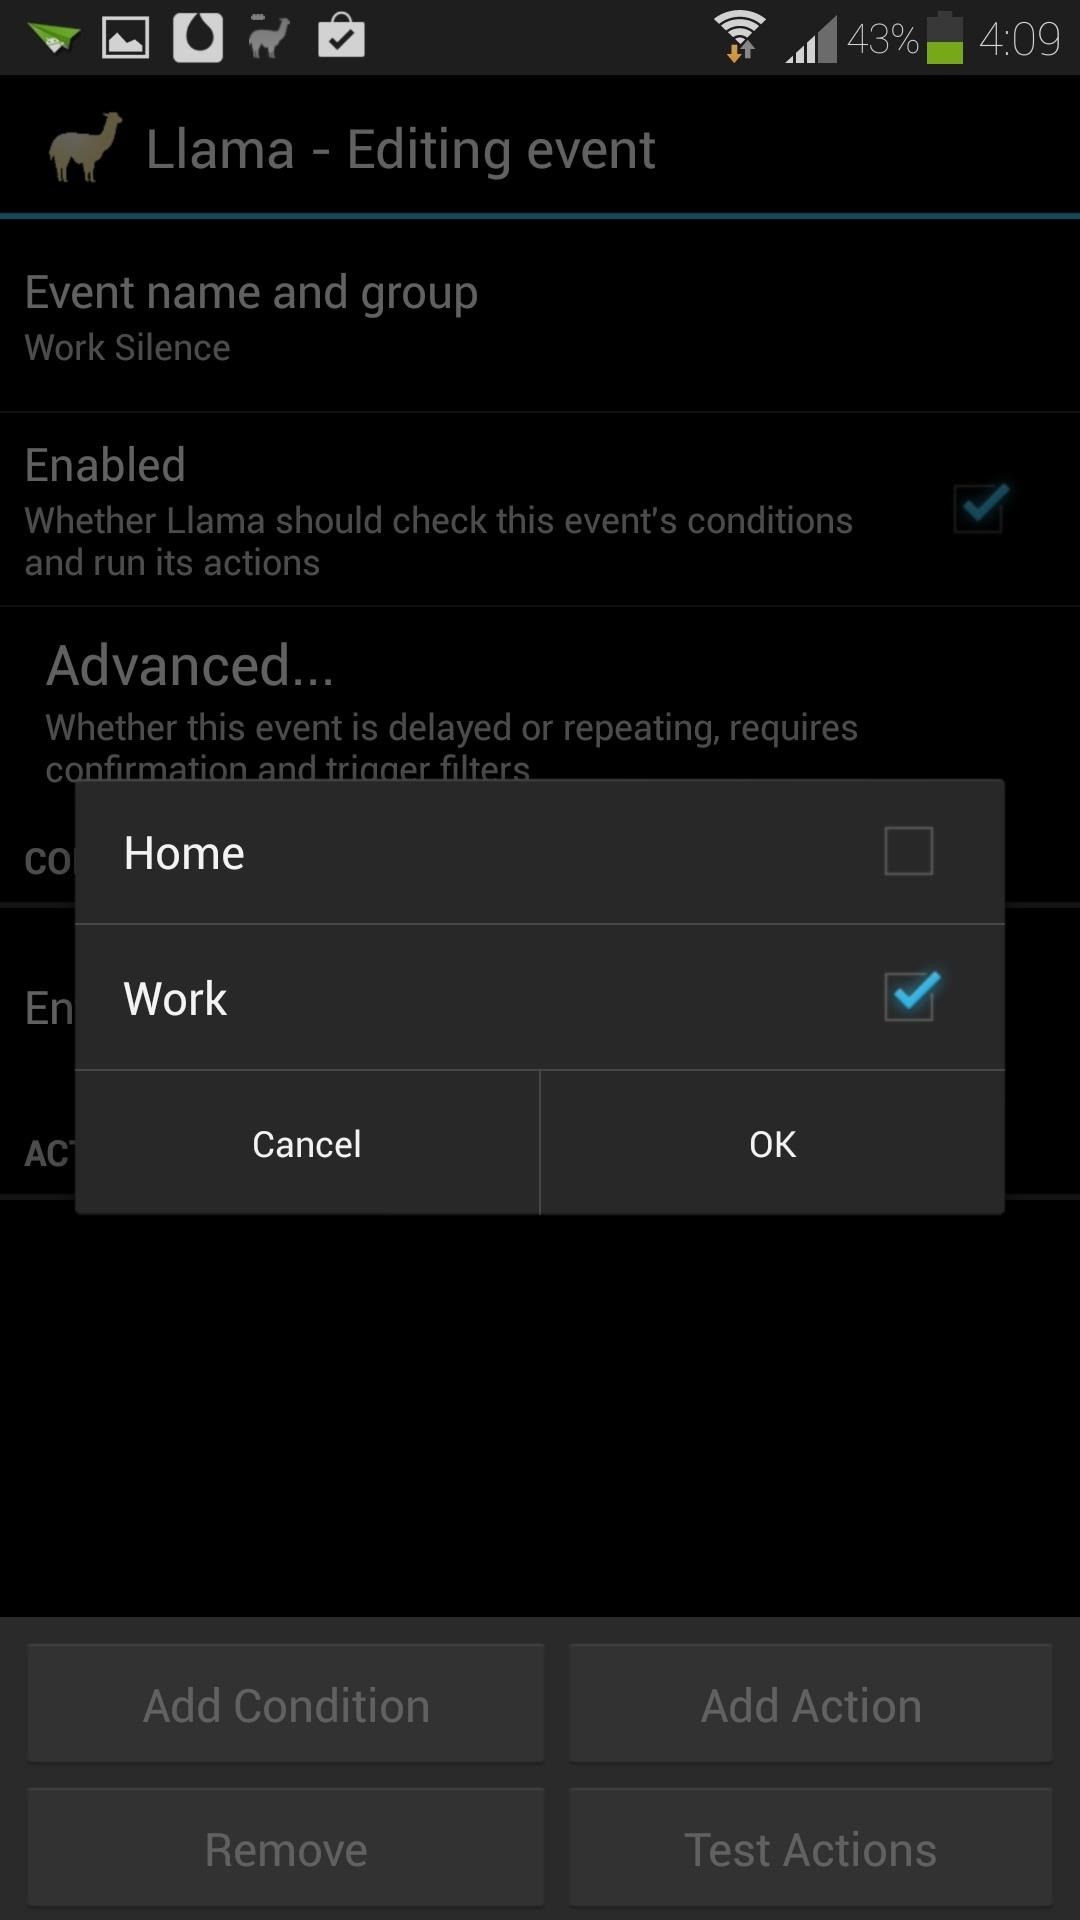 How to Automate Battery-Saving Mode, Screen Rotation, & Other Custom Tasks on Your Samsung Galaxy S4